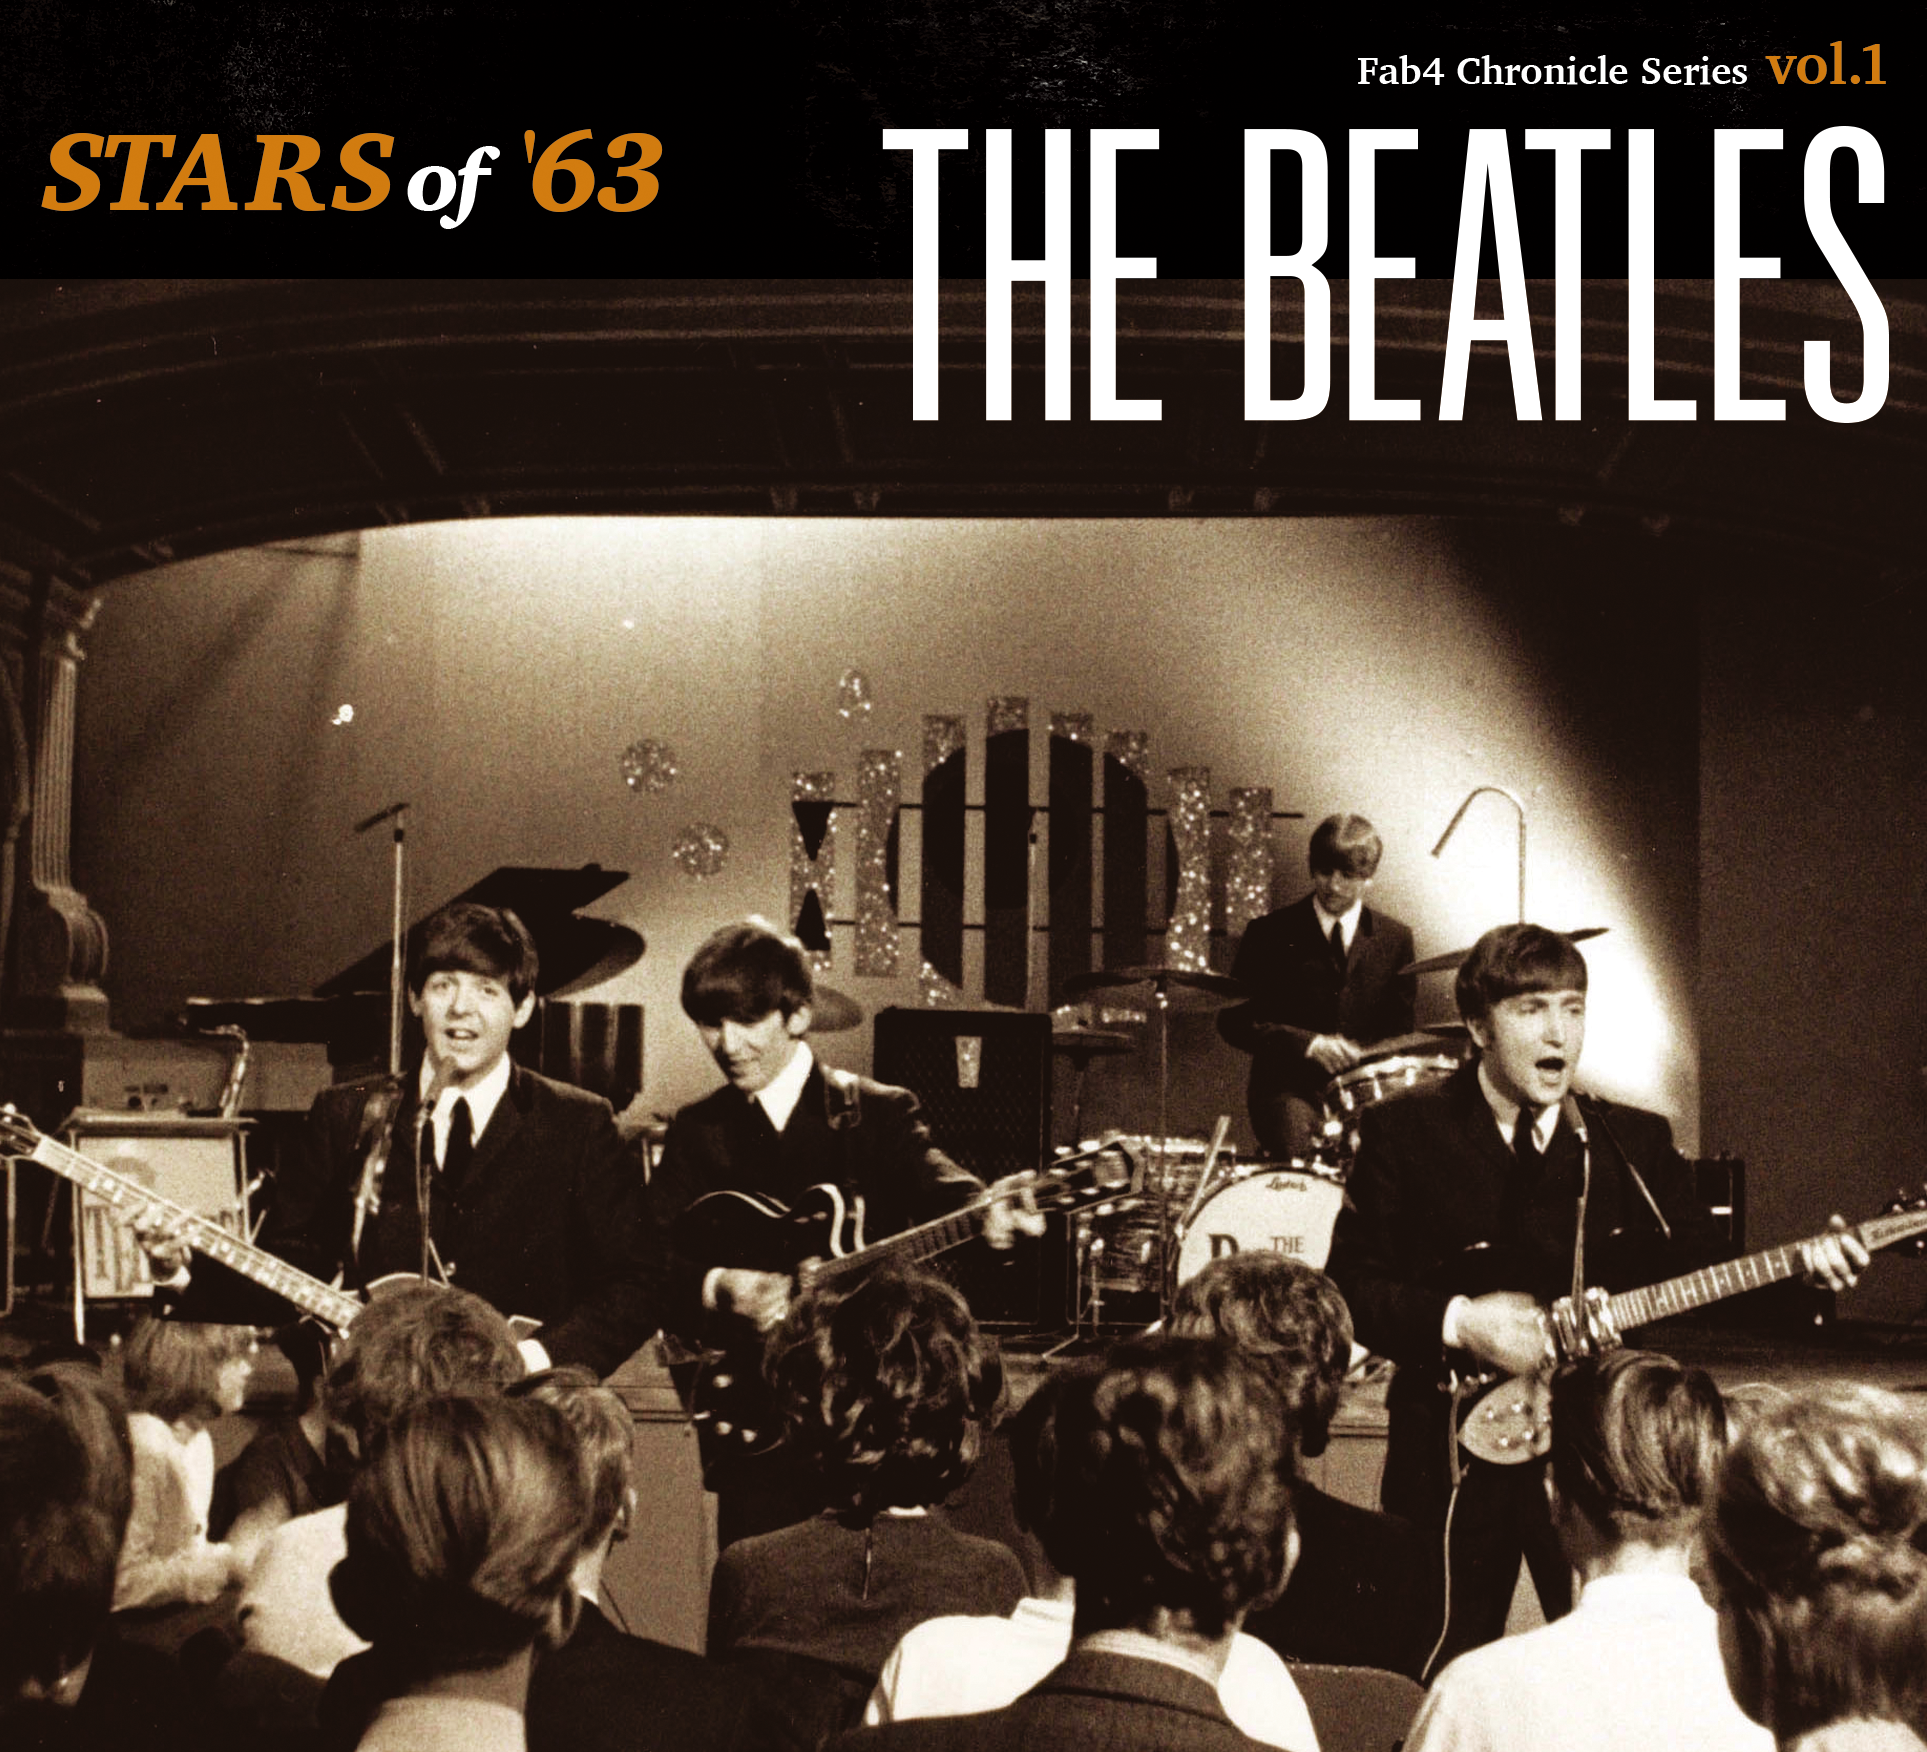 THE BEATLES / STARS of ’63